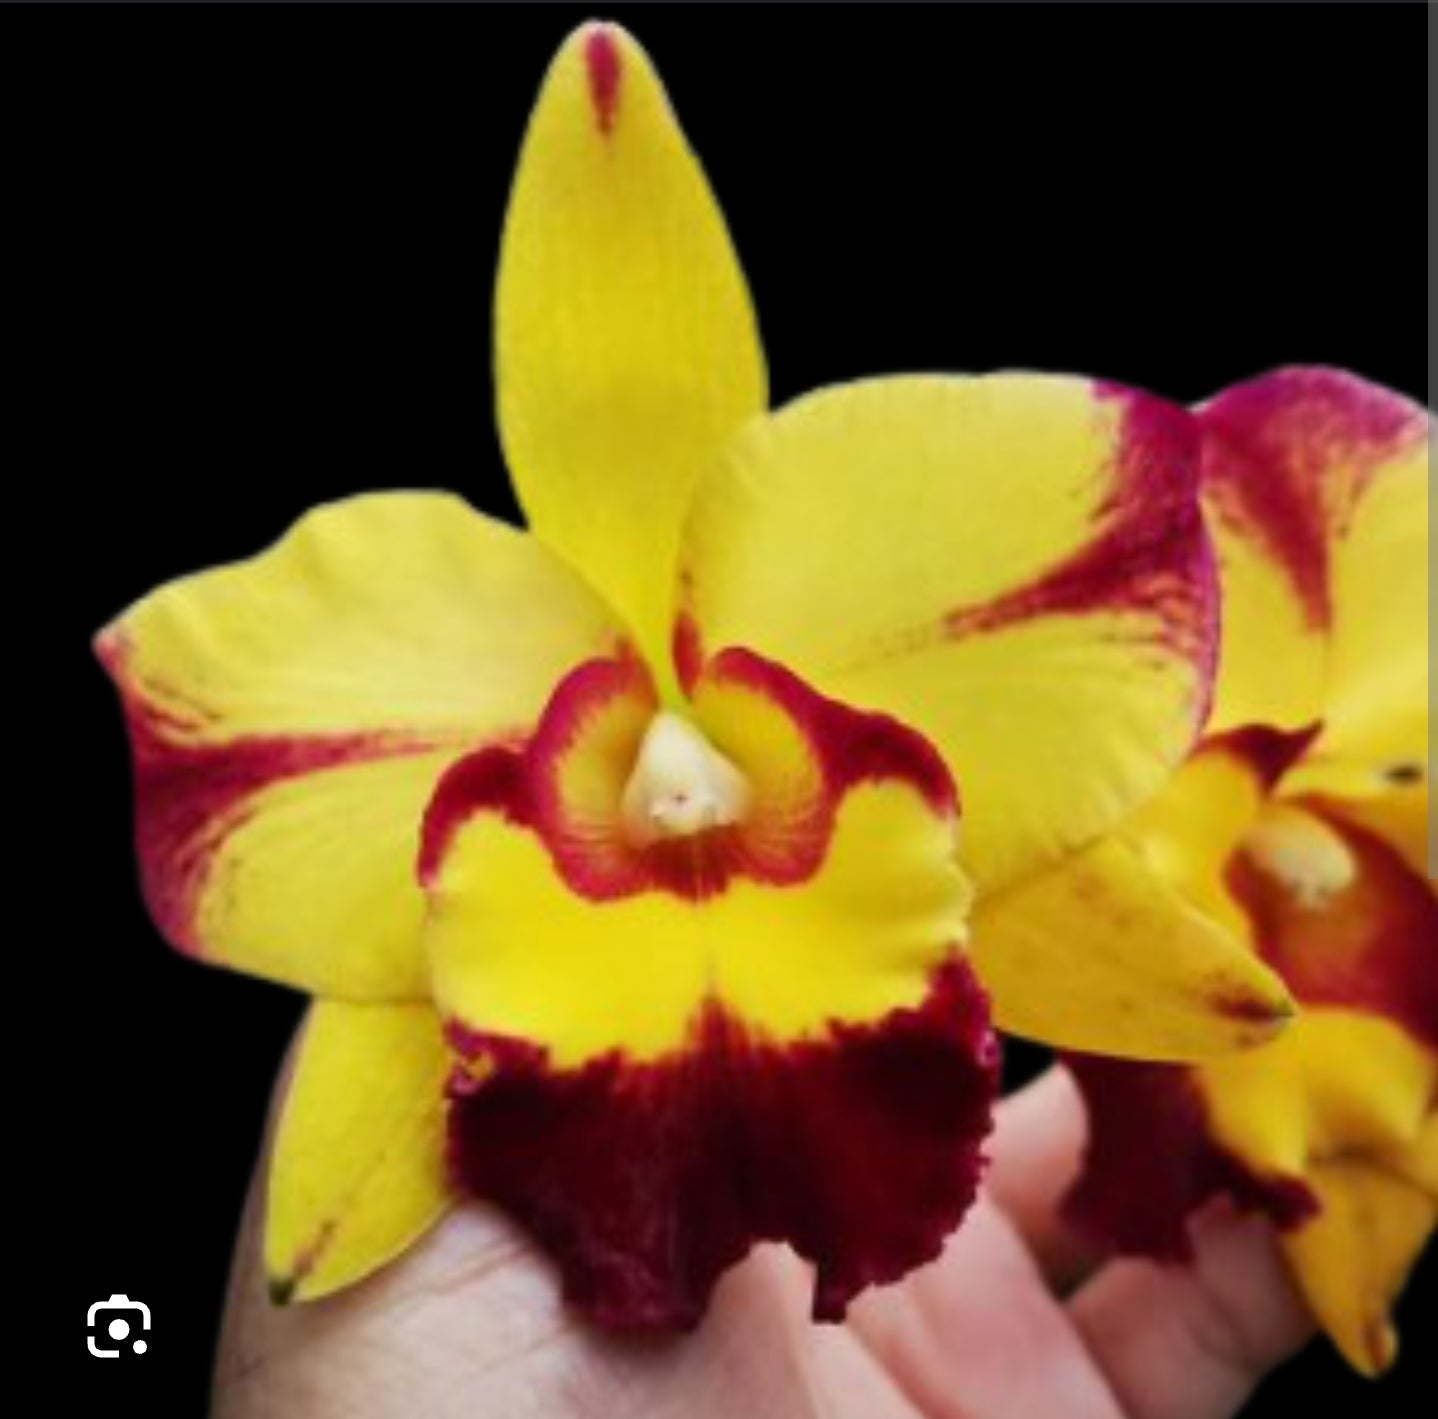 Rlc. Shang Ding Beauty PlantMadness